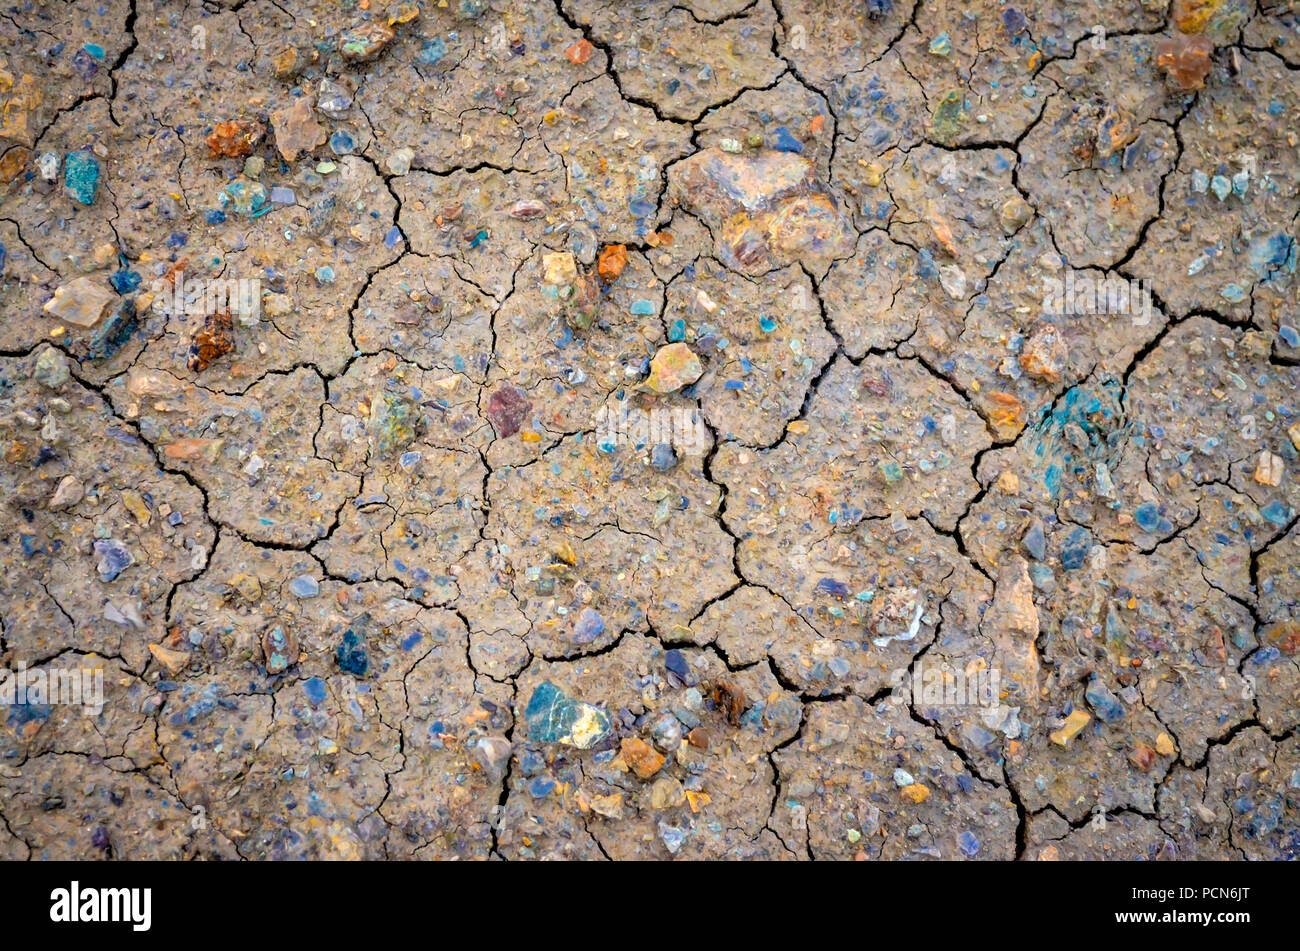 Dried and cracked mud with colorful stones as background Stock Photo